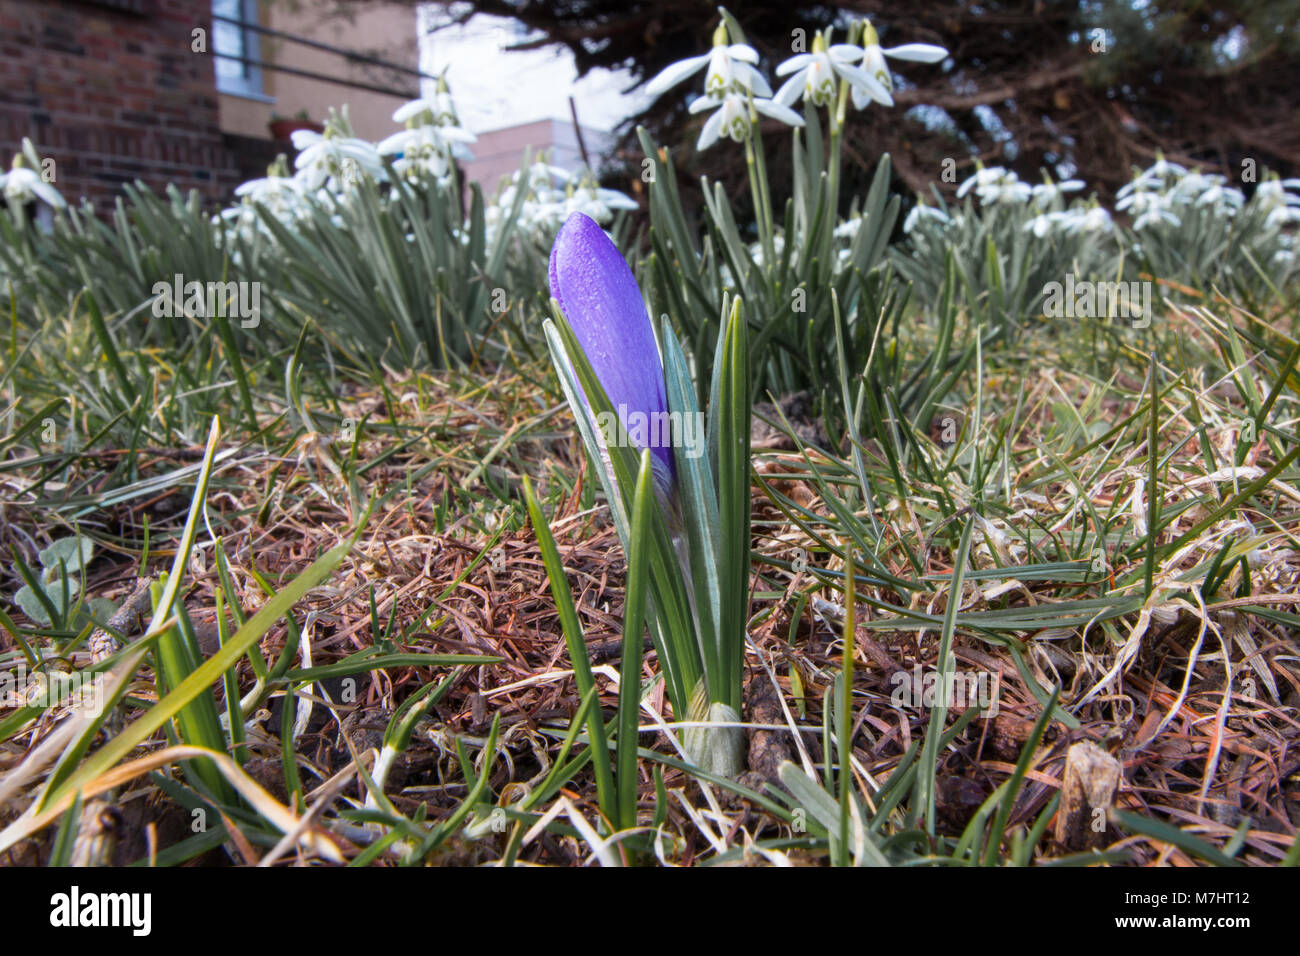 The first signs of spring bloom, a purple crocus and beautiful snowdrops. Stock Photo